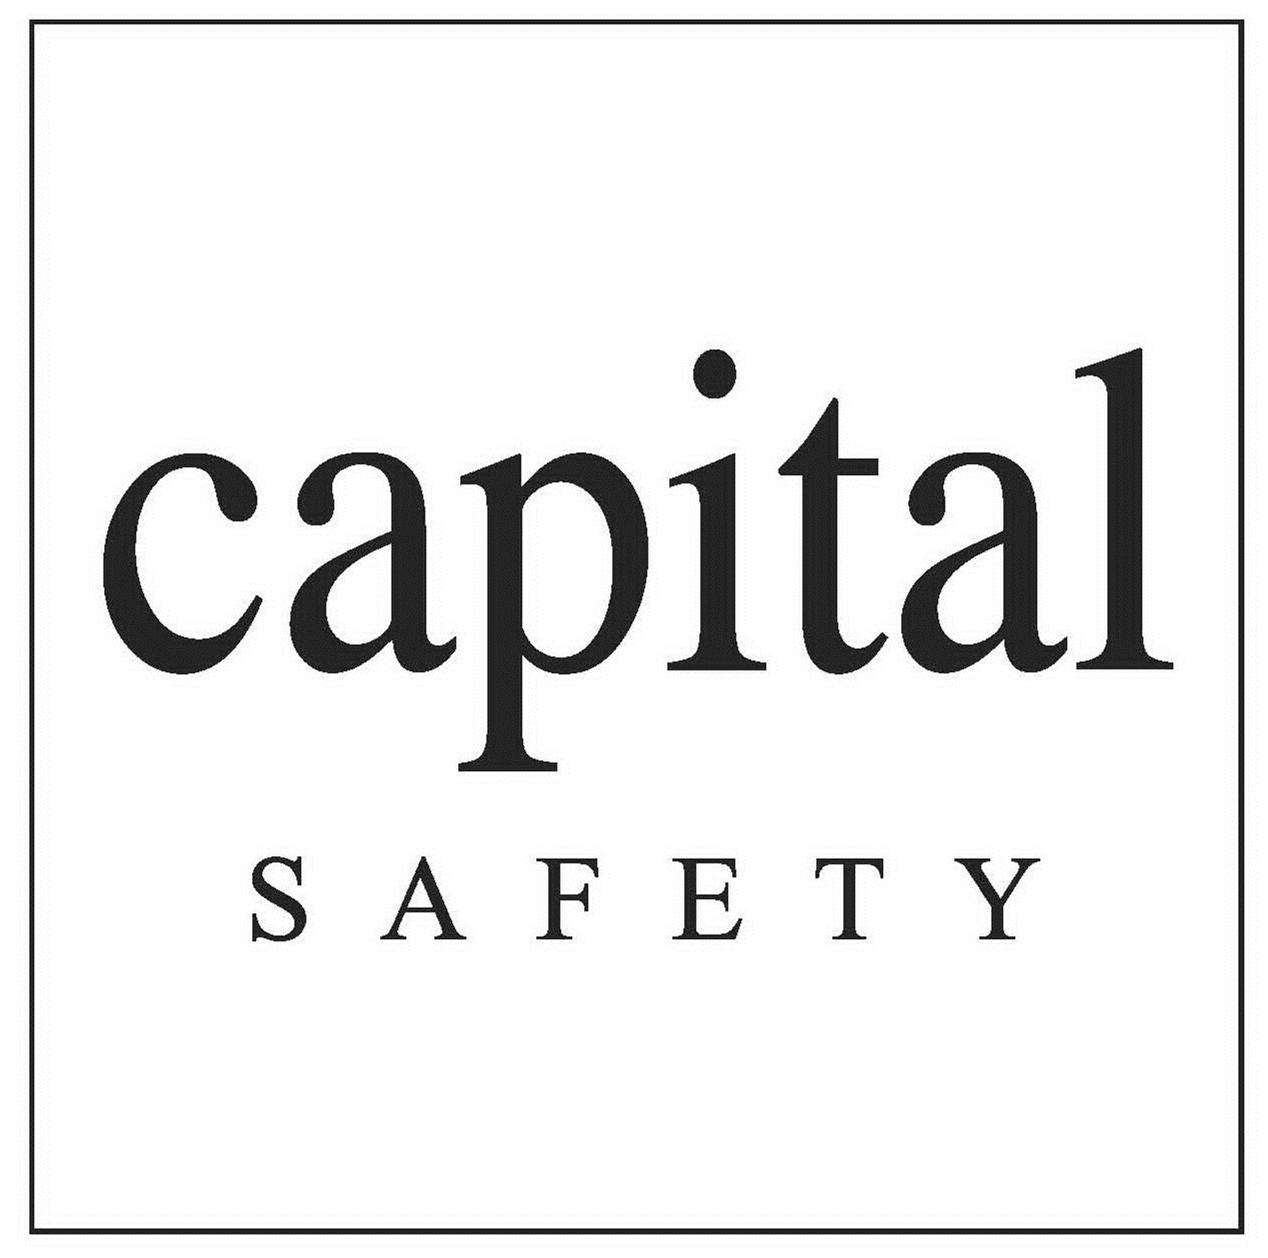  CAPITAL SAFETY